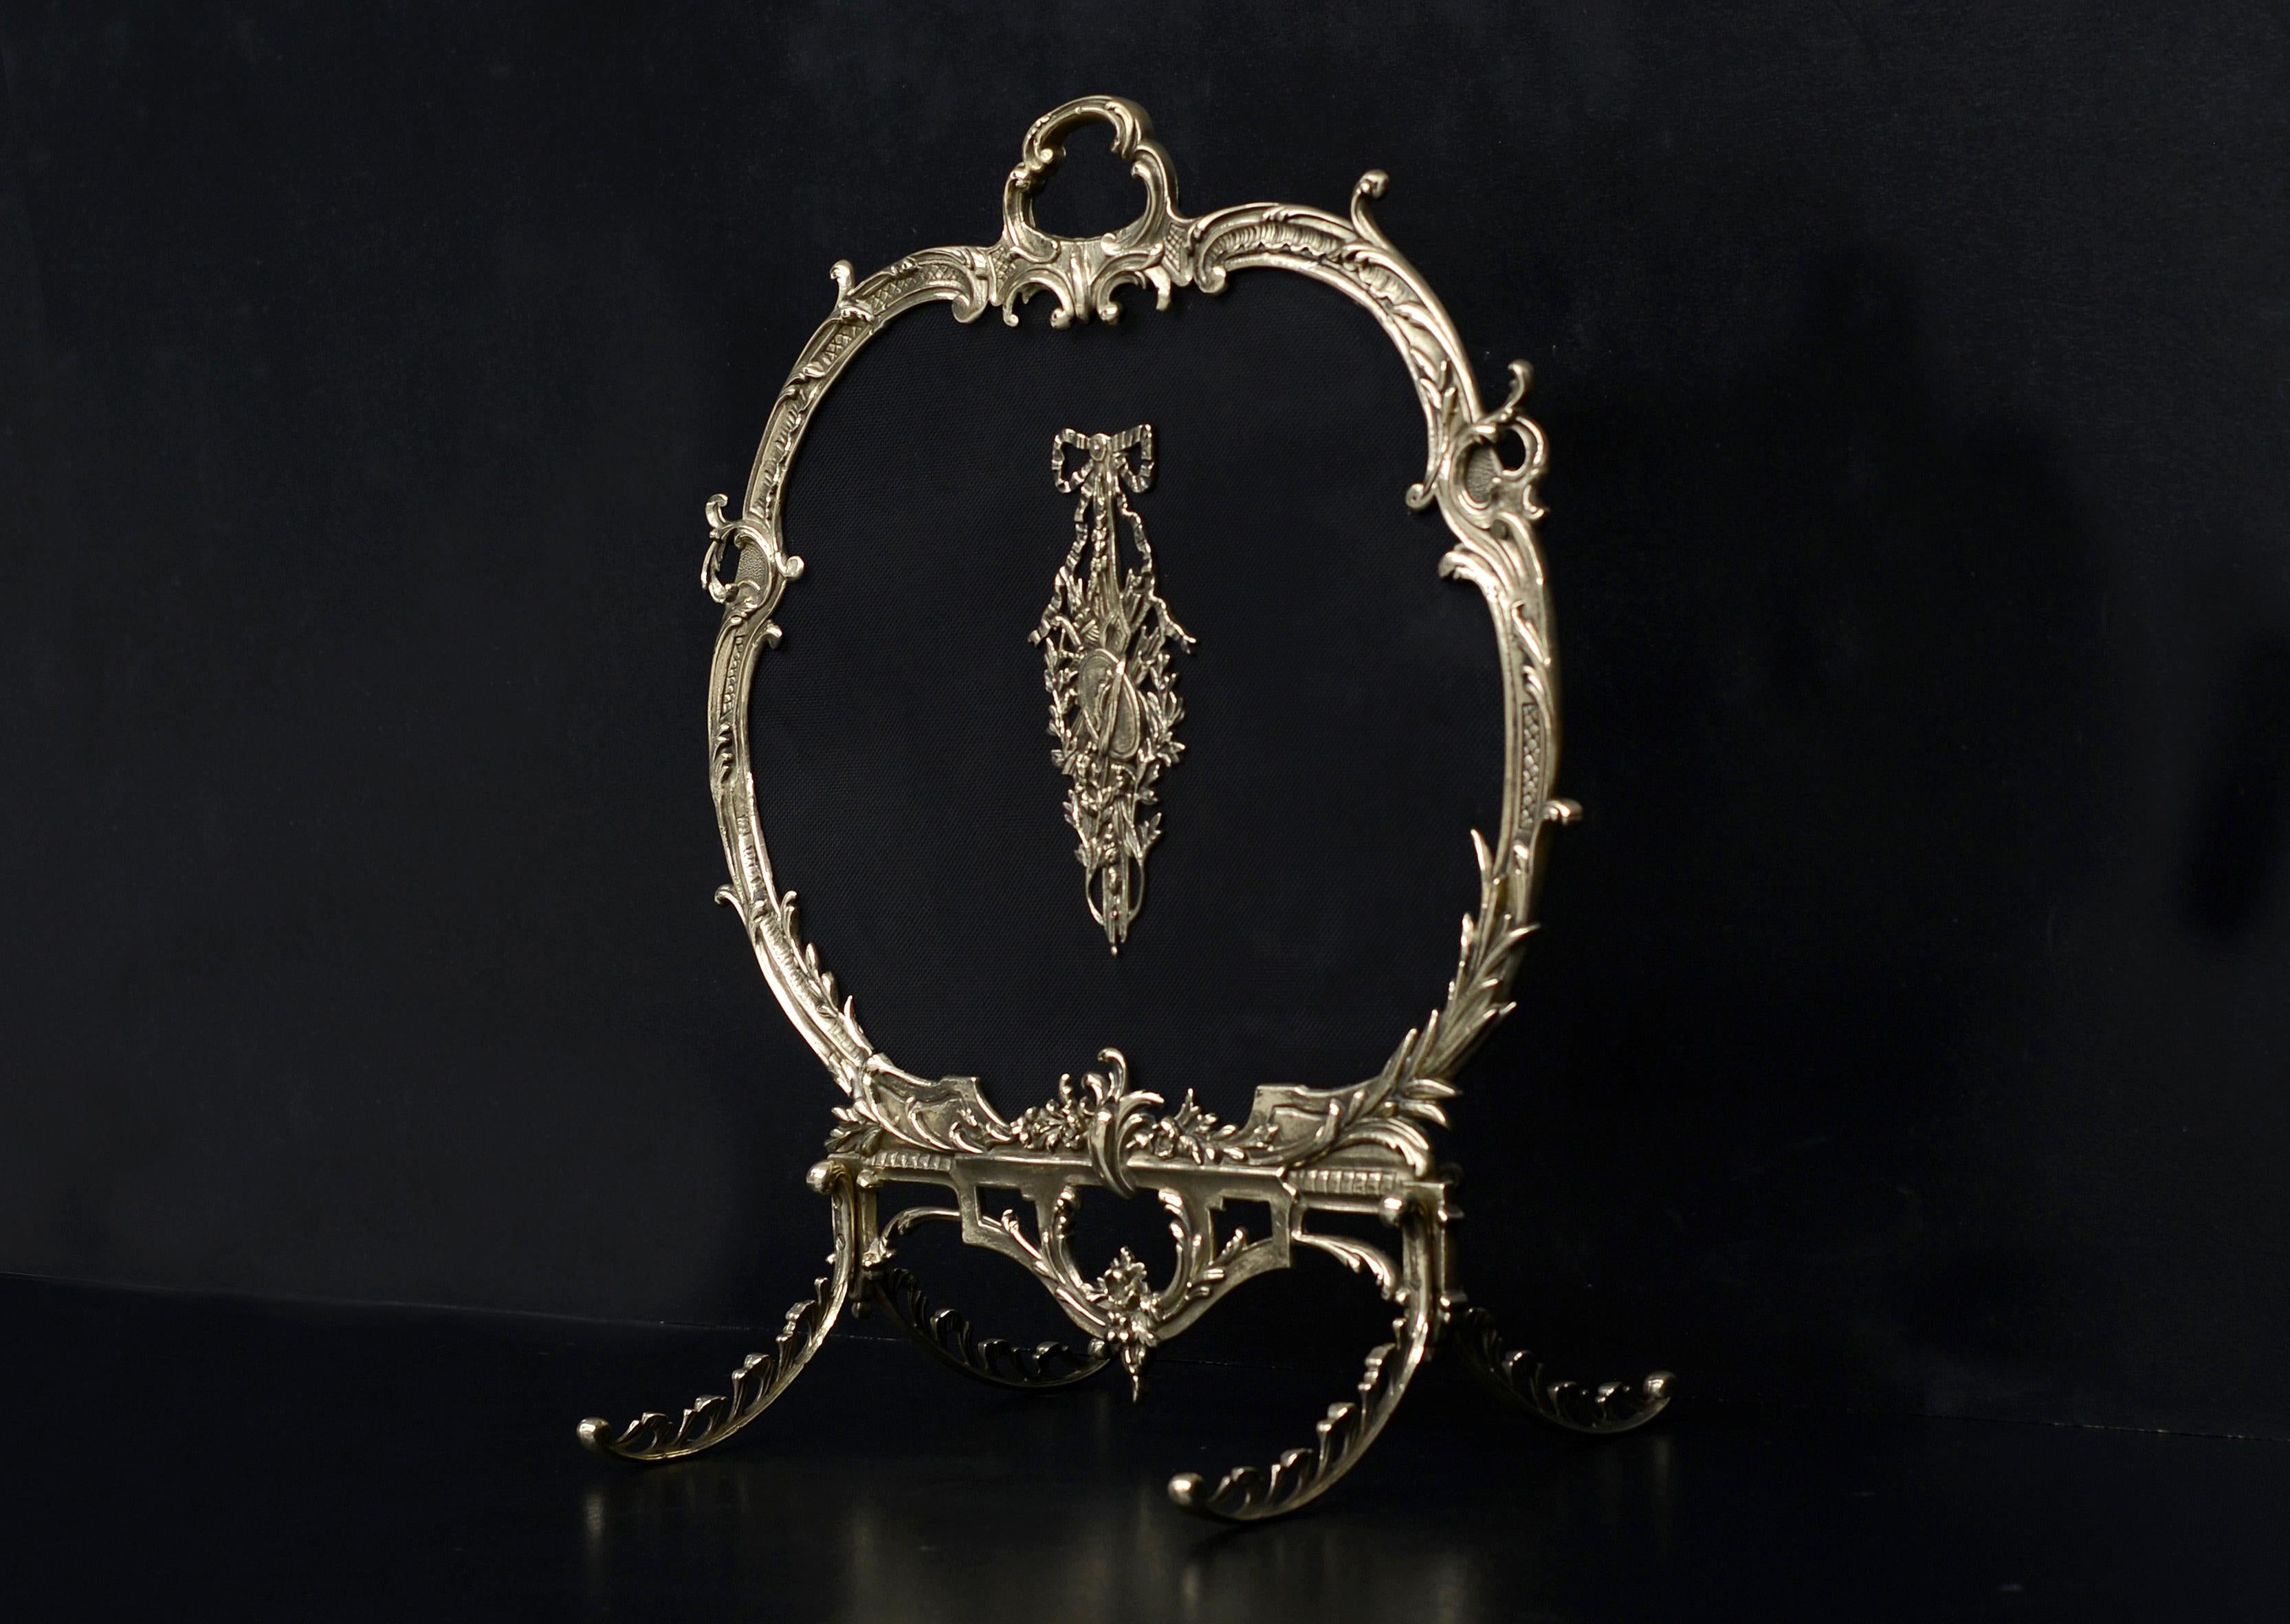 A French brass firescreen with decorative Rococo frame and legs. The fine black mesh behind adorned with brass embellishment with tied ribbon, torch, quiver and shield. 19th century. Unusually small design. (Depth of feet - 14